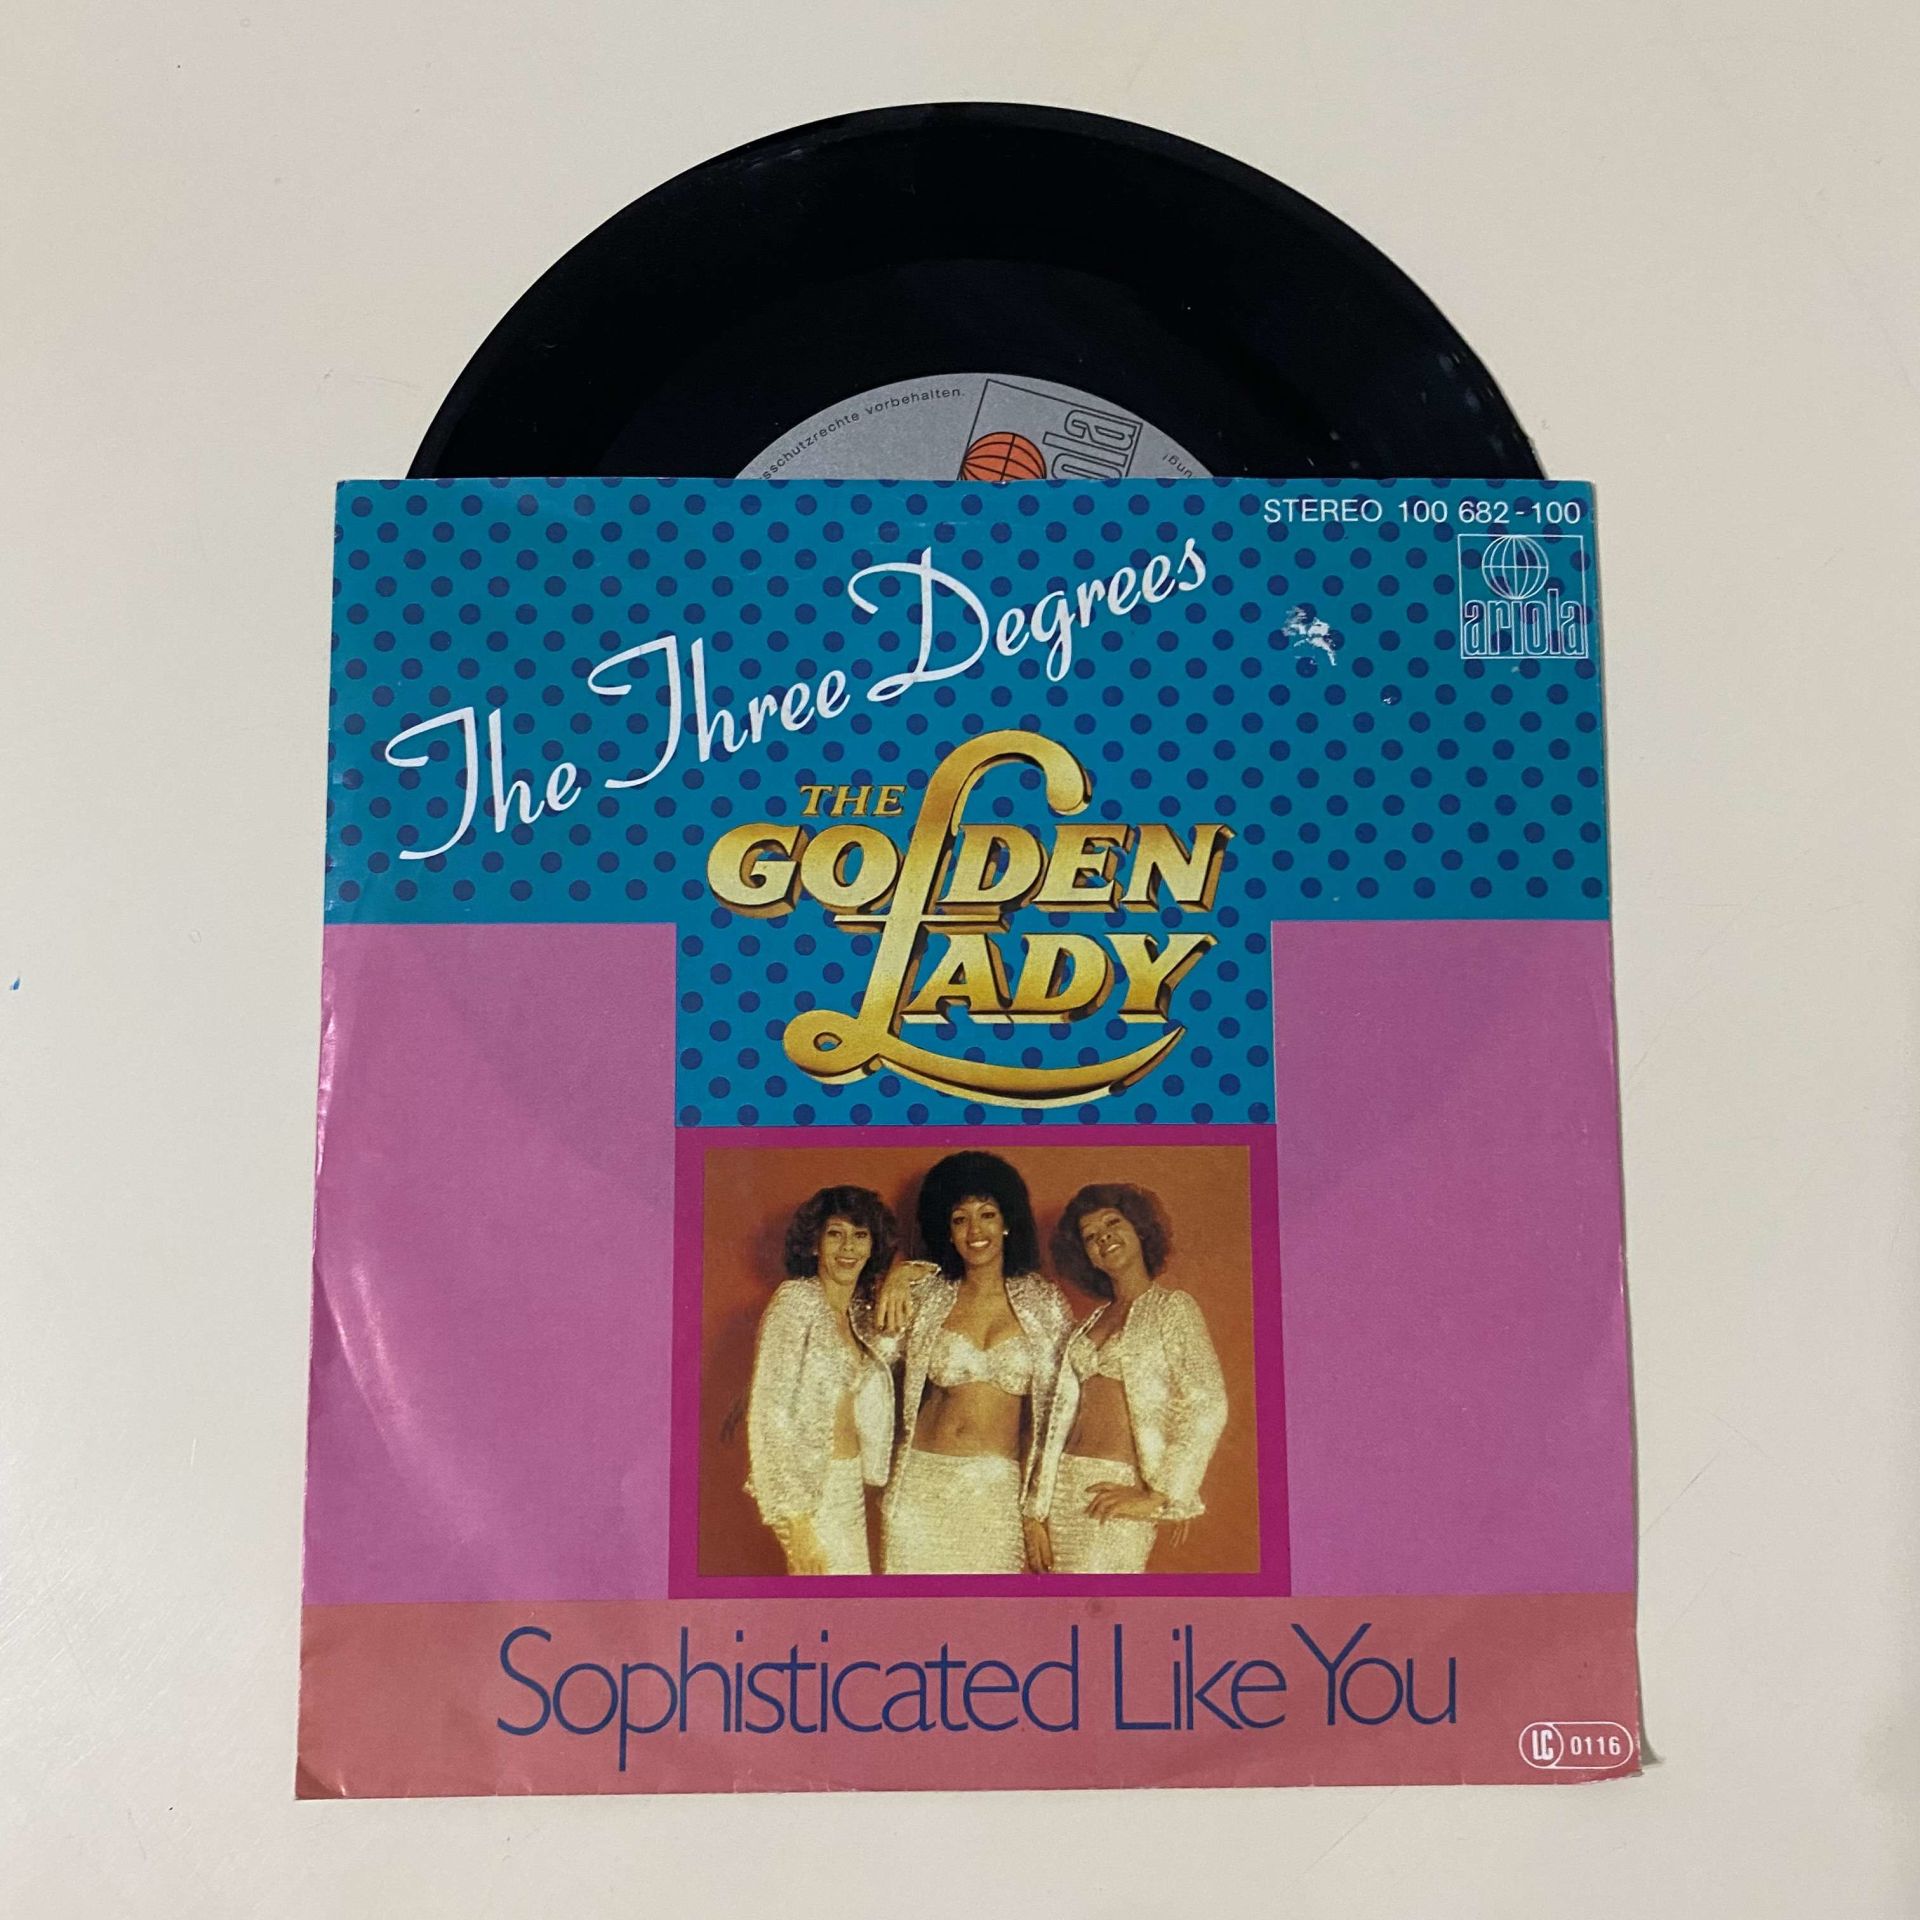 The Three Degrees – The Golden Lady